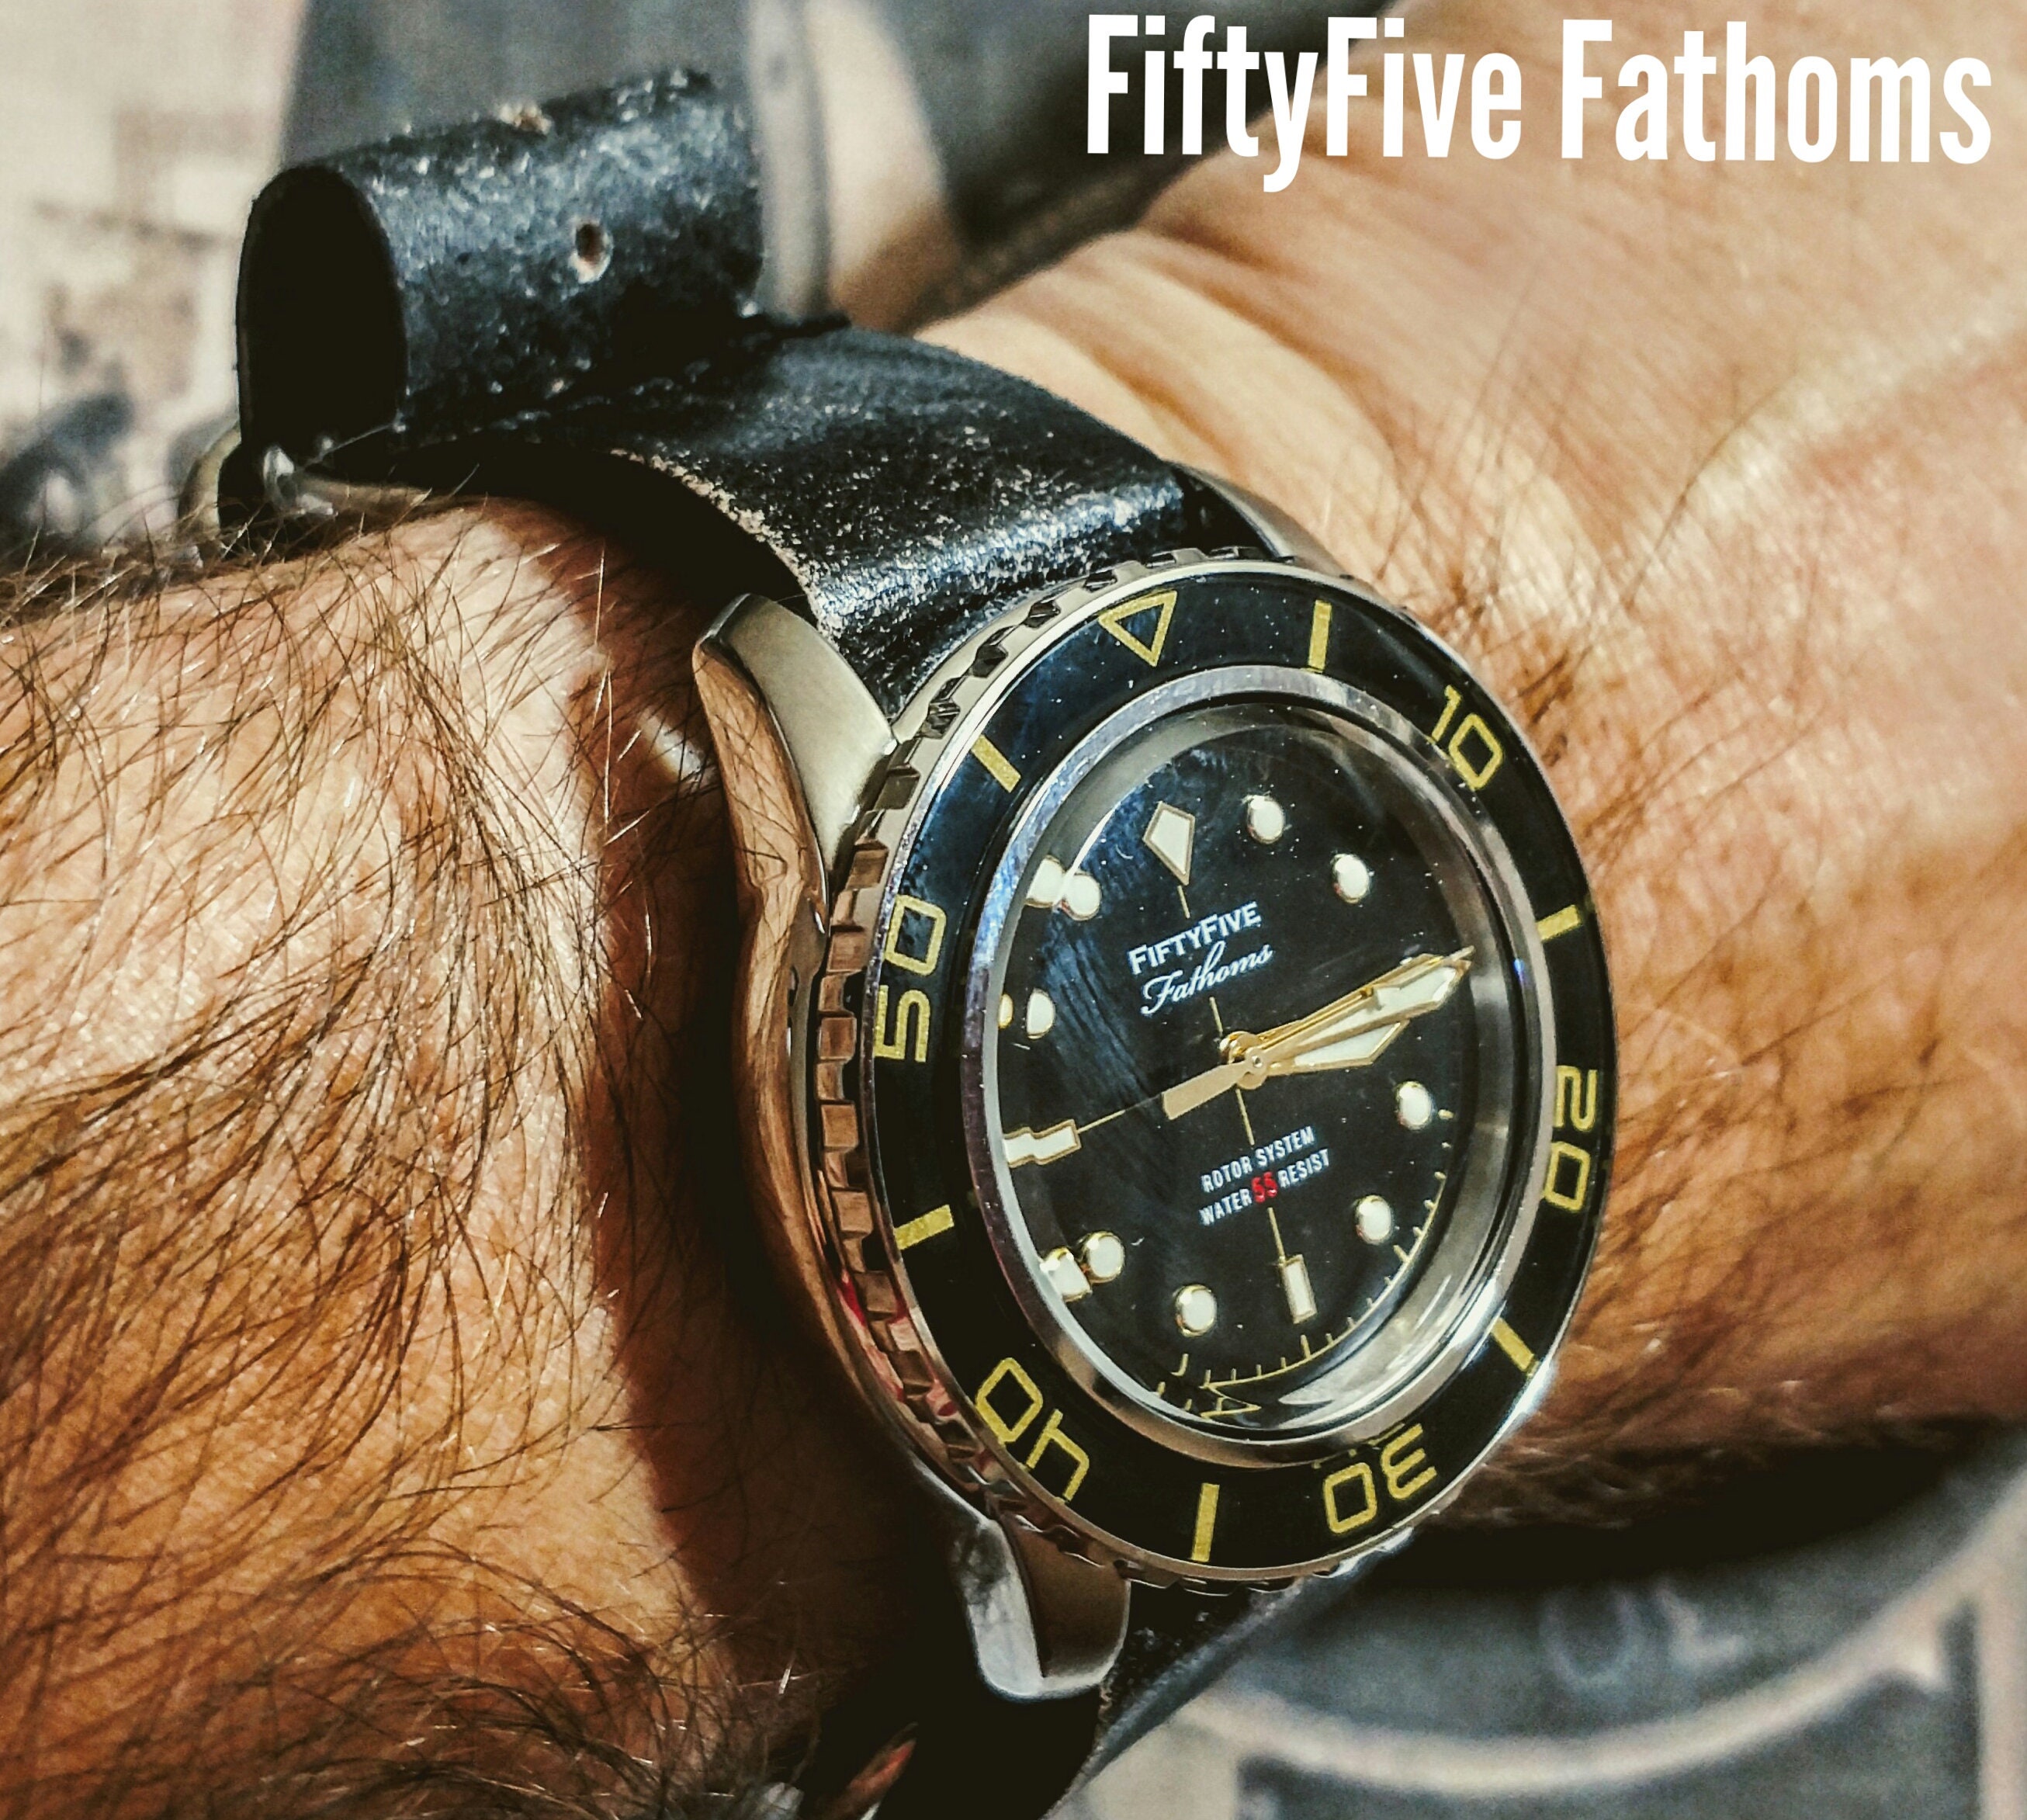 Buy Deposit for Seiko Fifty Five Fathoms Mod Watch read Online in India -  Etsy